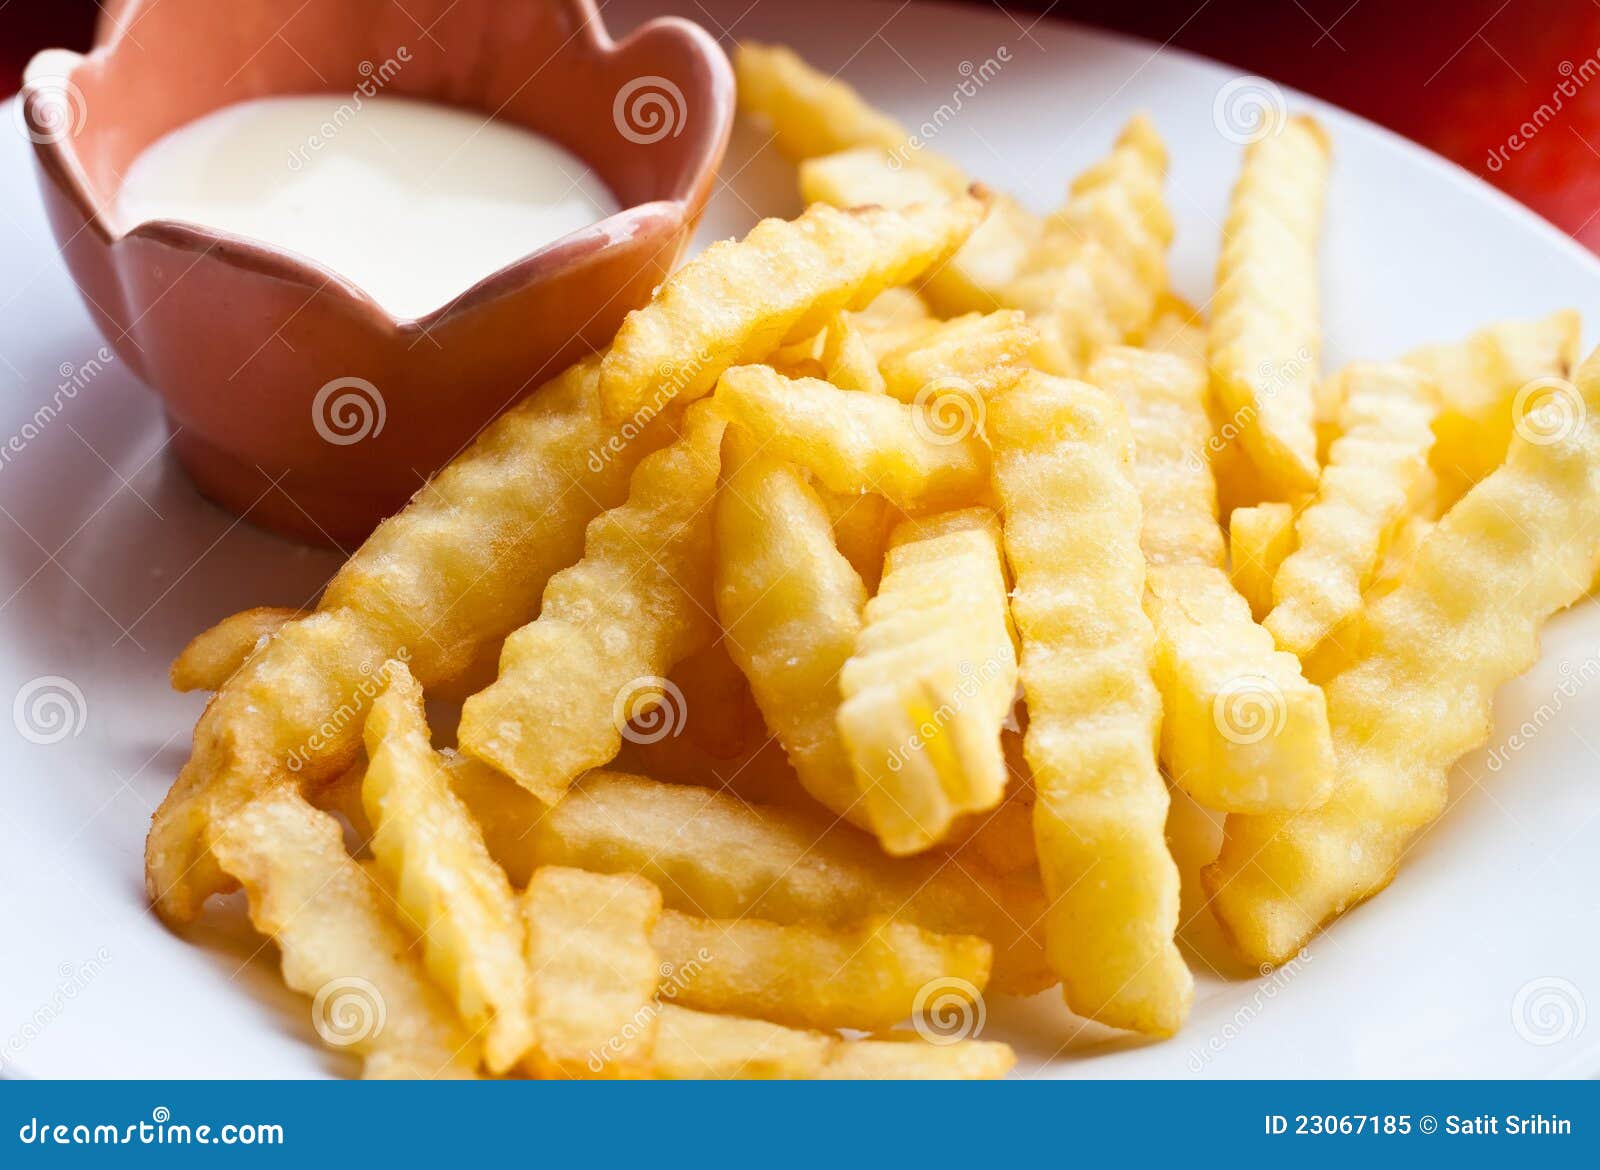 French Fries with Mayonnaise Stock Image - Image of restaurant ...